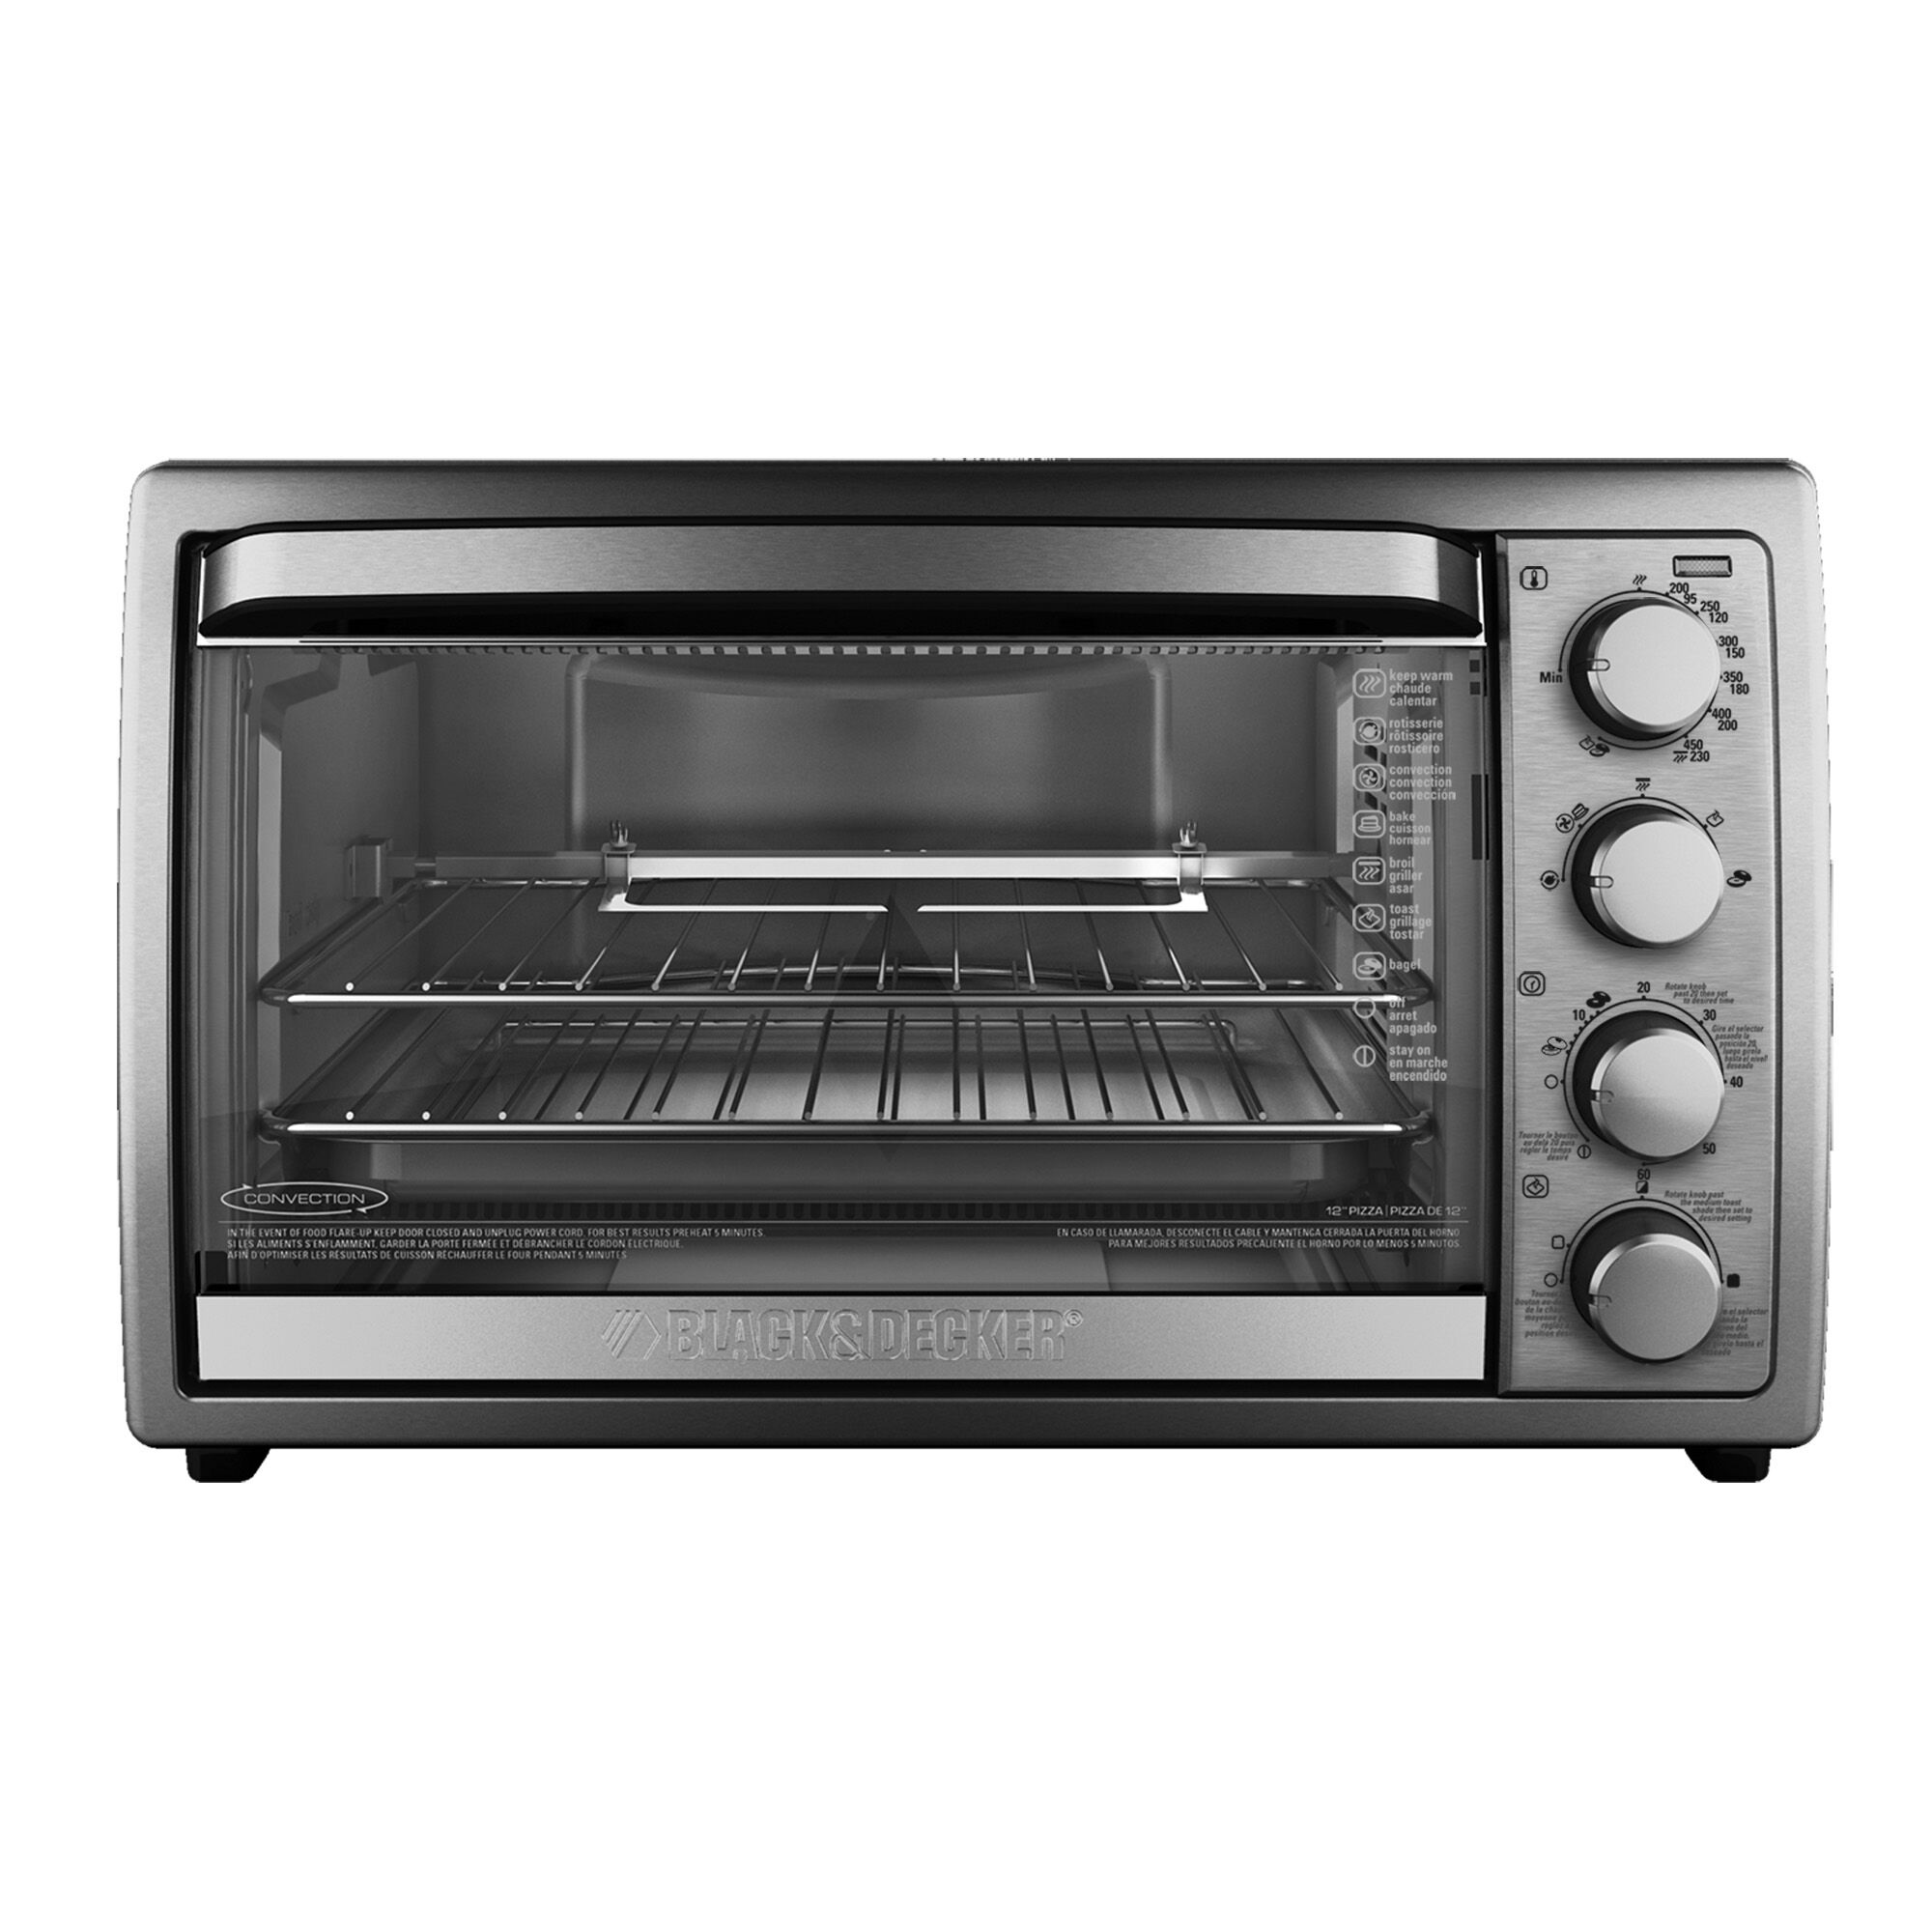 6 Slice Stainless Steel Convection Toaster Oven with Rotisserie.